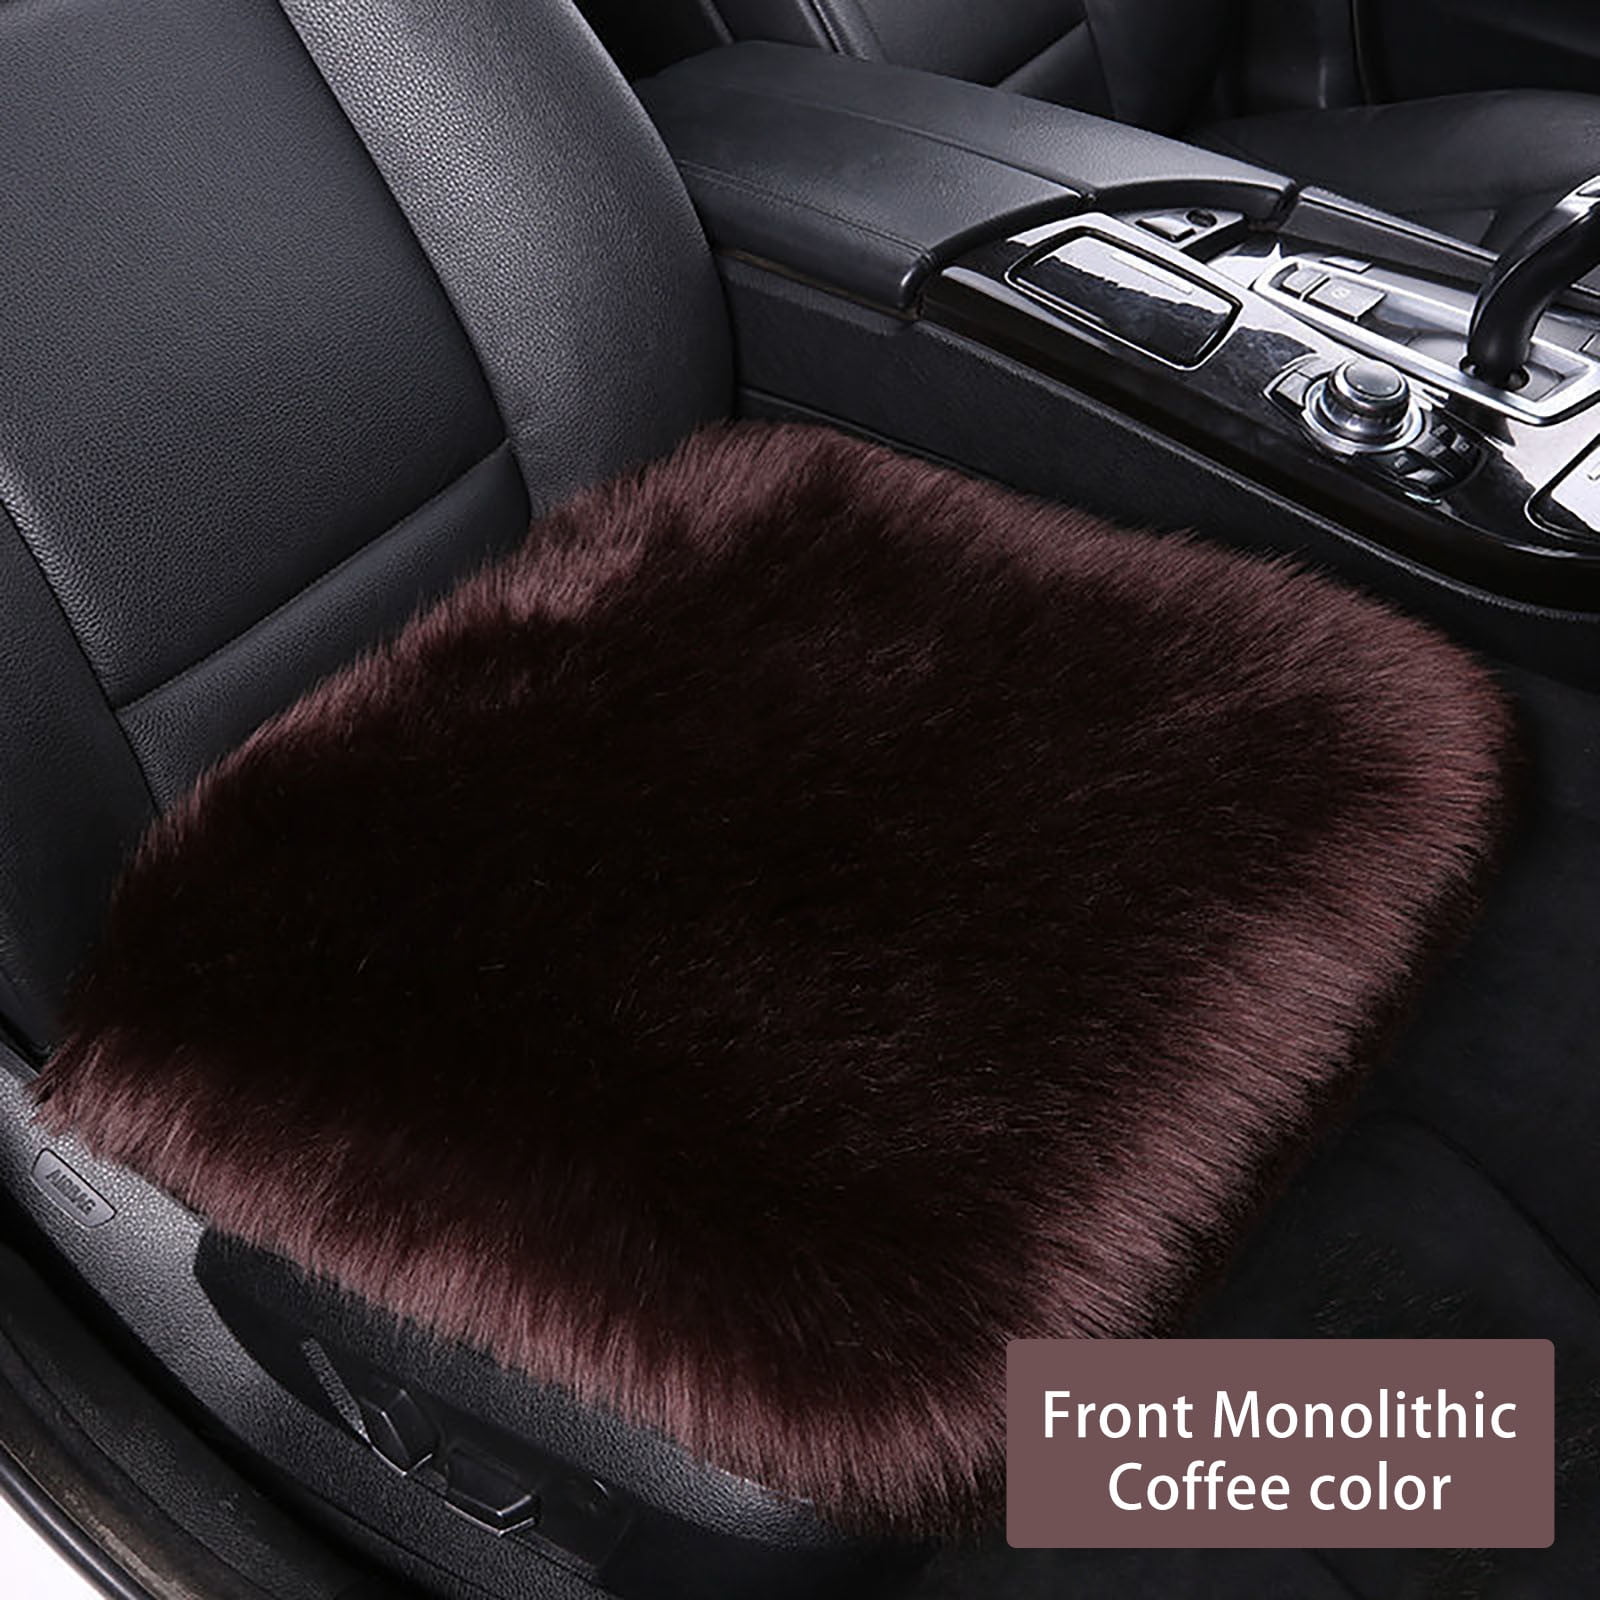  PoBoo Faux Sheepskin Car Seat Cushions(Full Set), Fluffy  Non-Slip Seat Covers, Fuzzy Heat-Insulted Pads Mats Universal Fit Auto,  SUV, Truck, Office and Home : Automotive